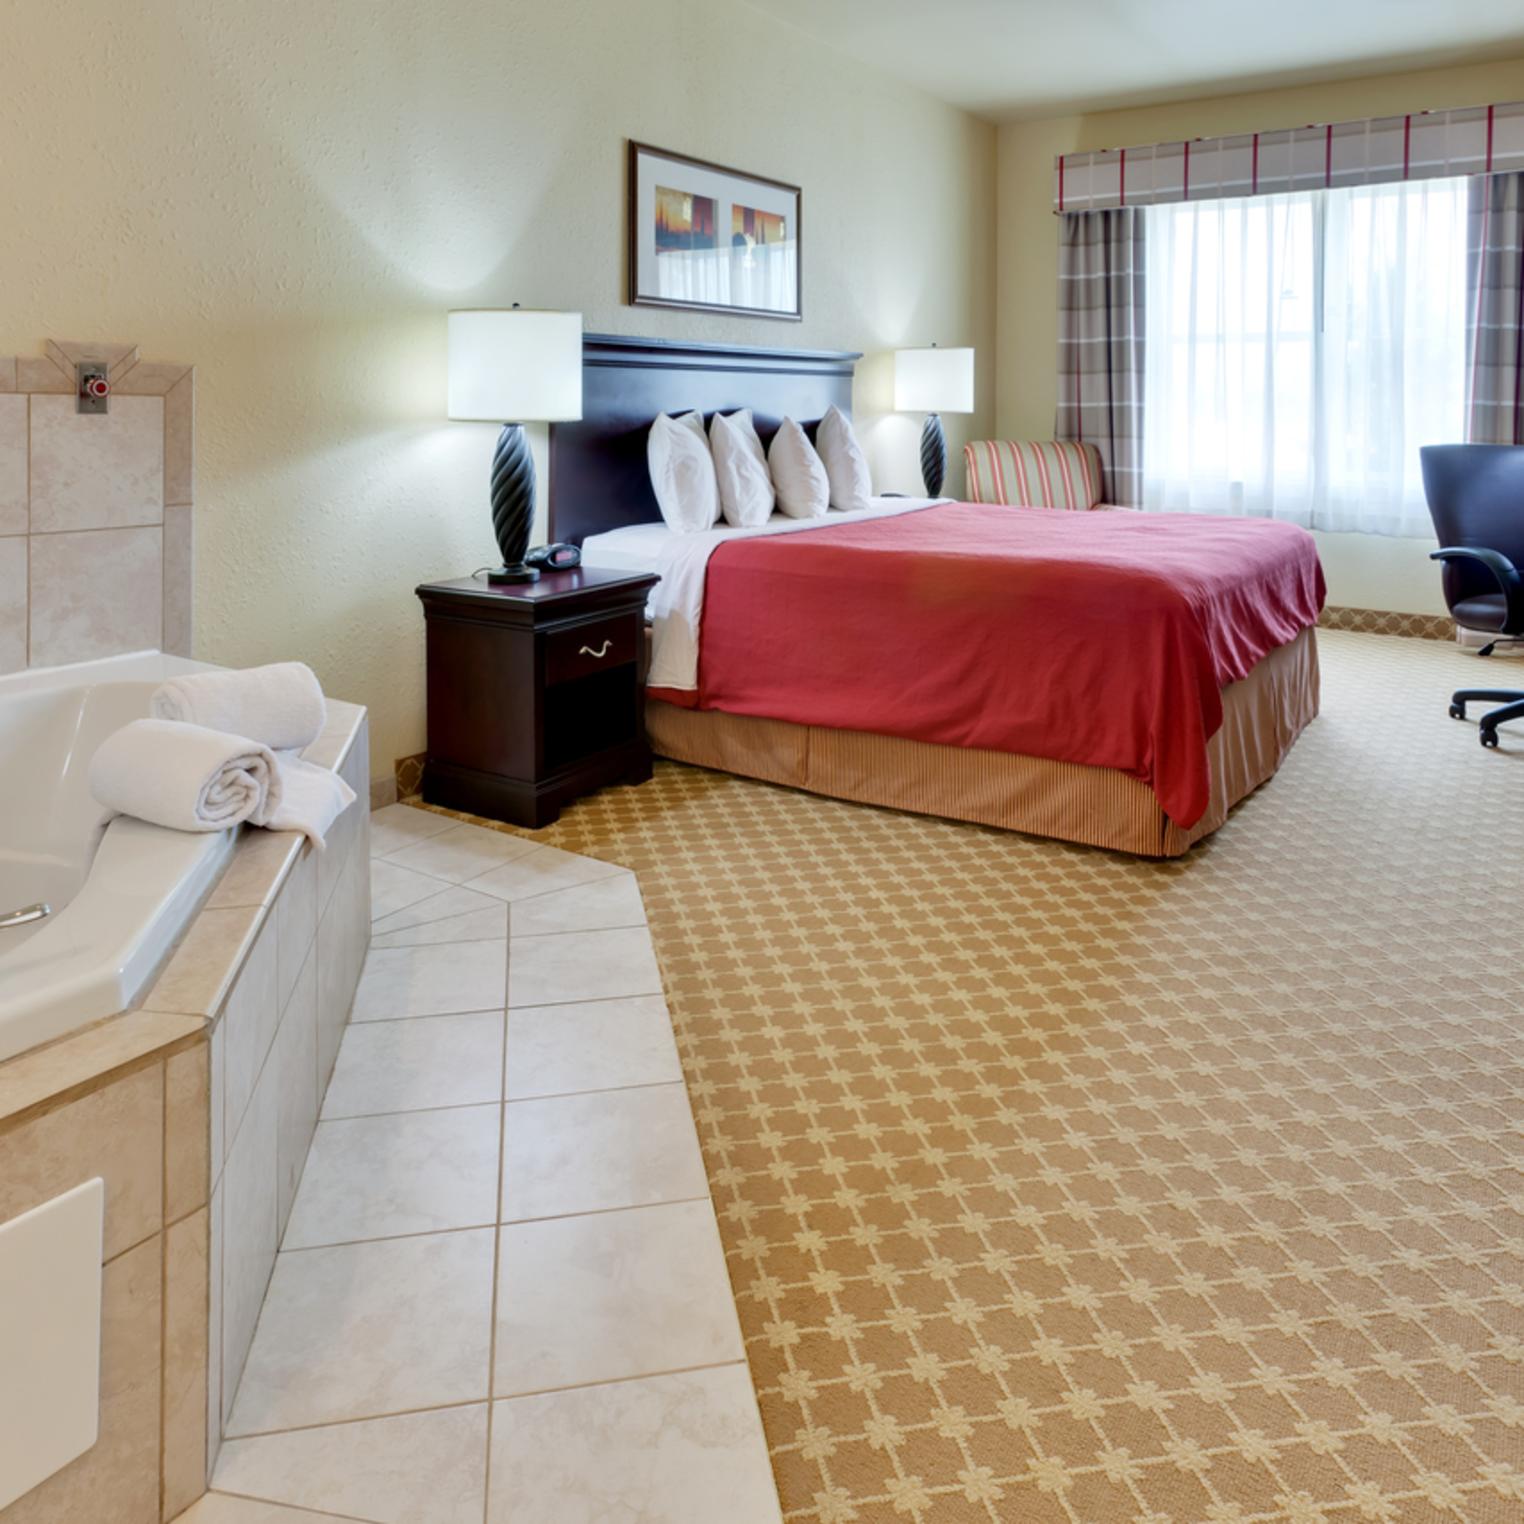 Country Inn and Suites Whirlpool Suite